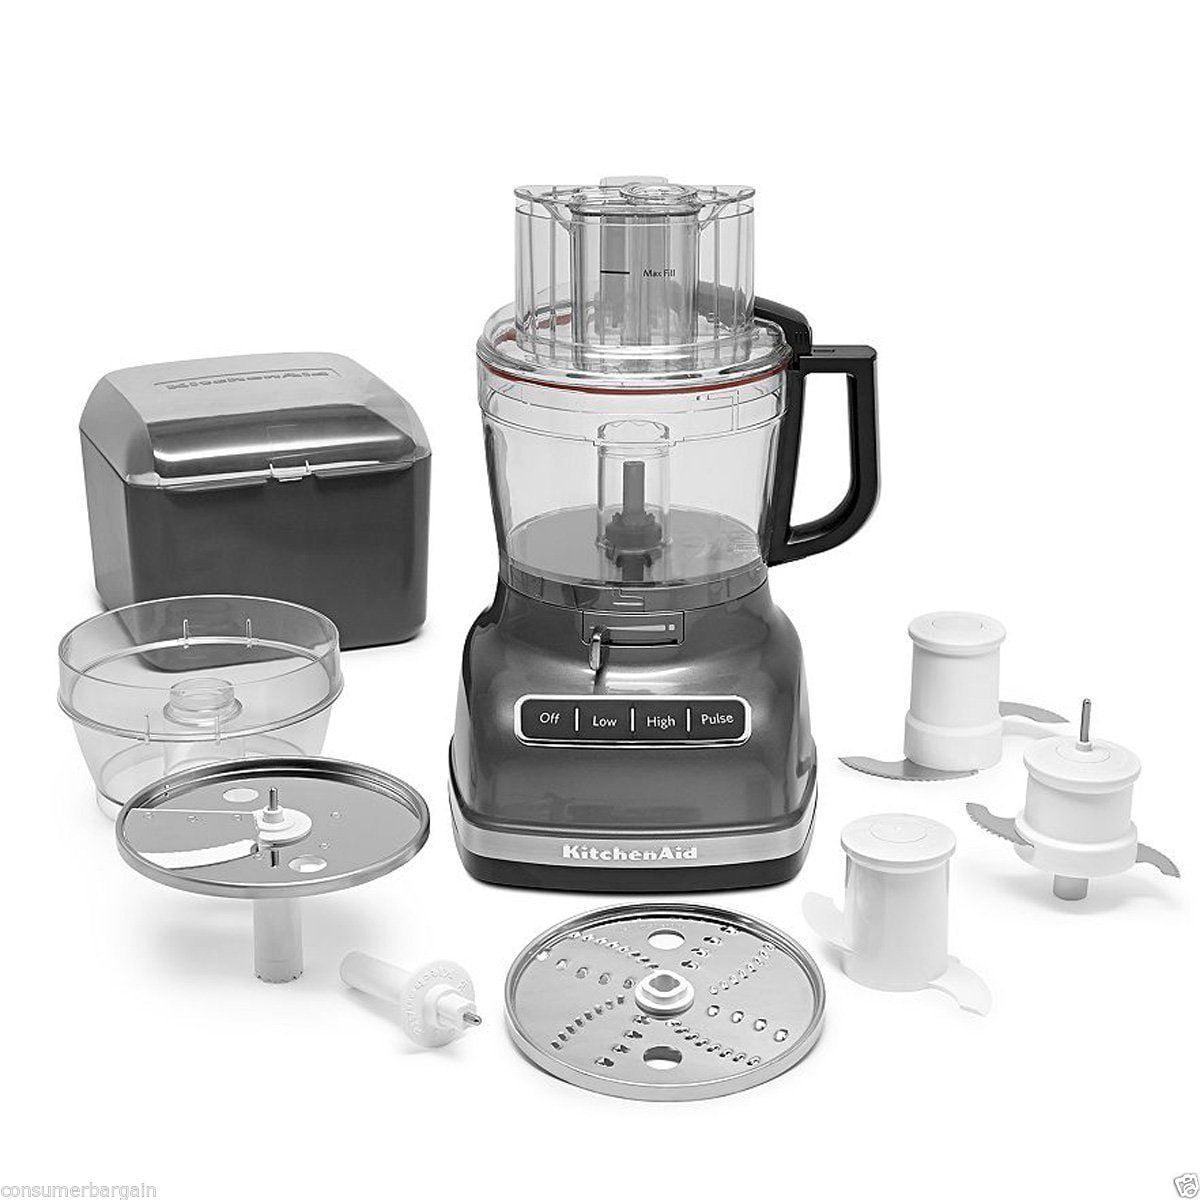 This KitchenAid Food Processor Is 43 Percent Off Today - 's